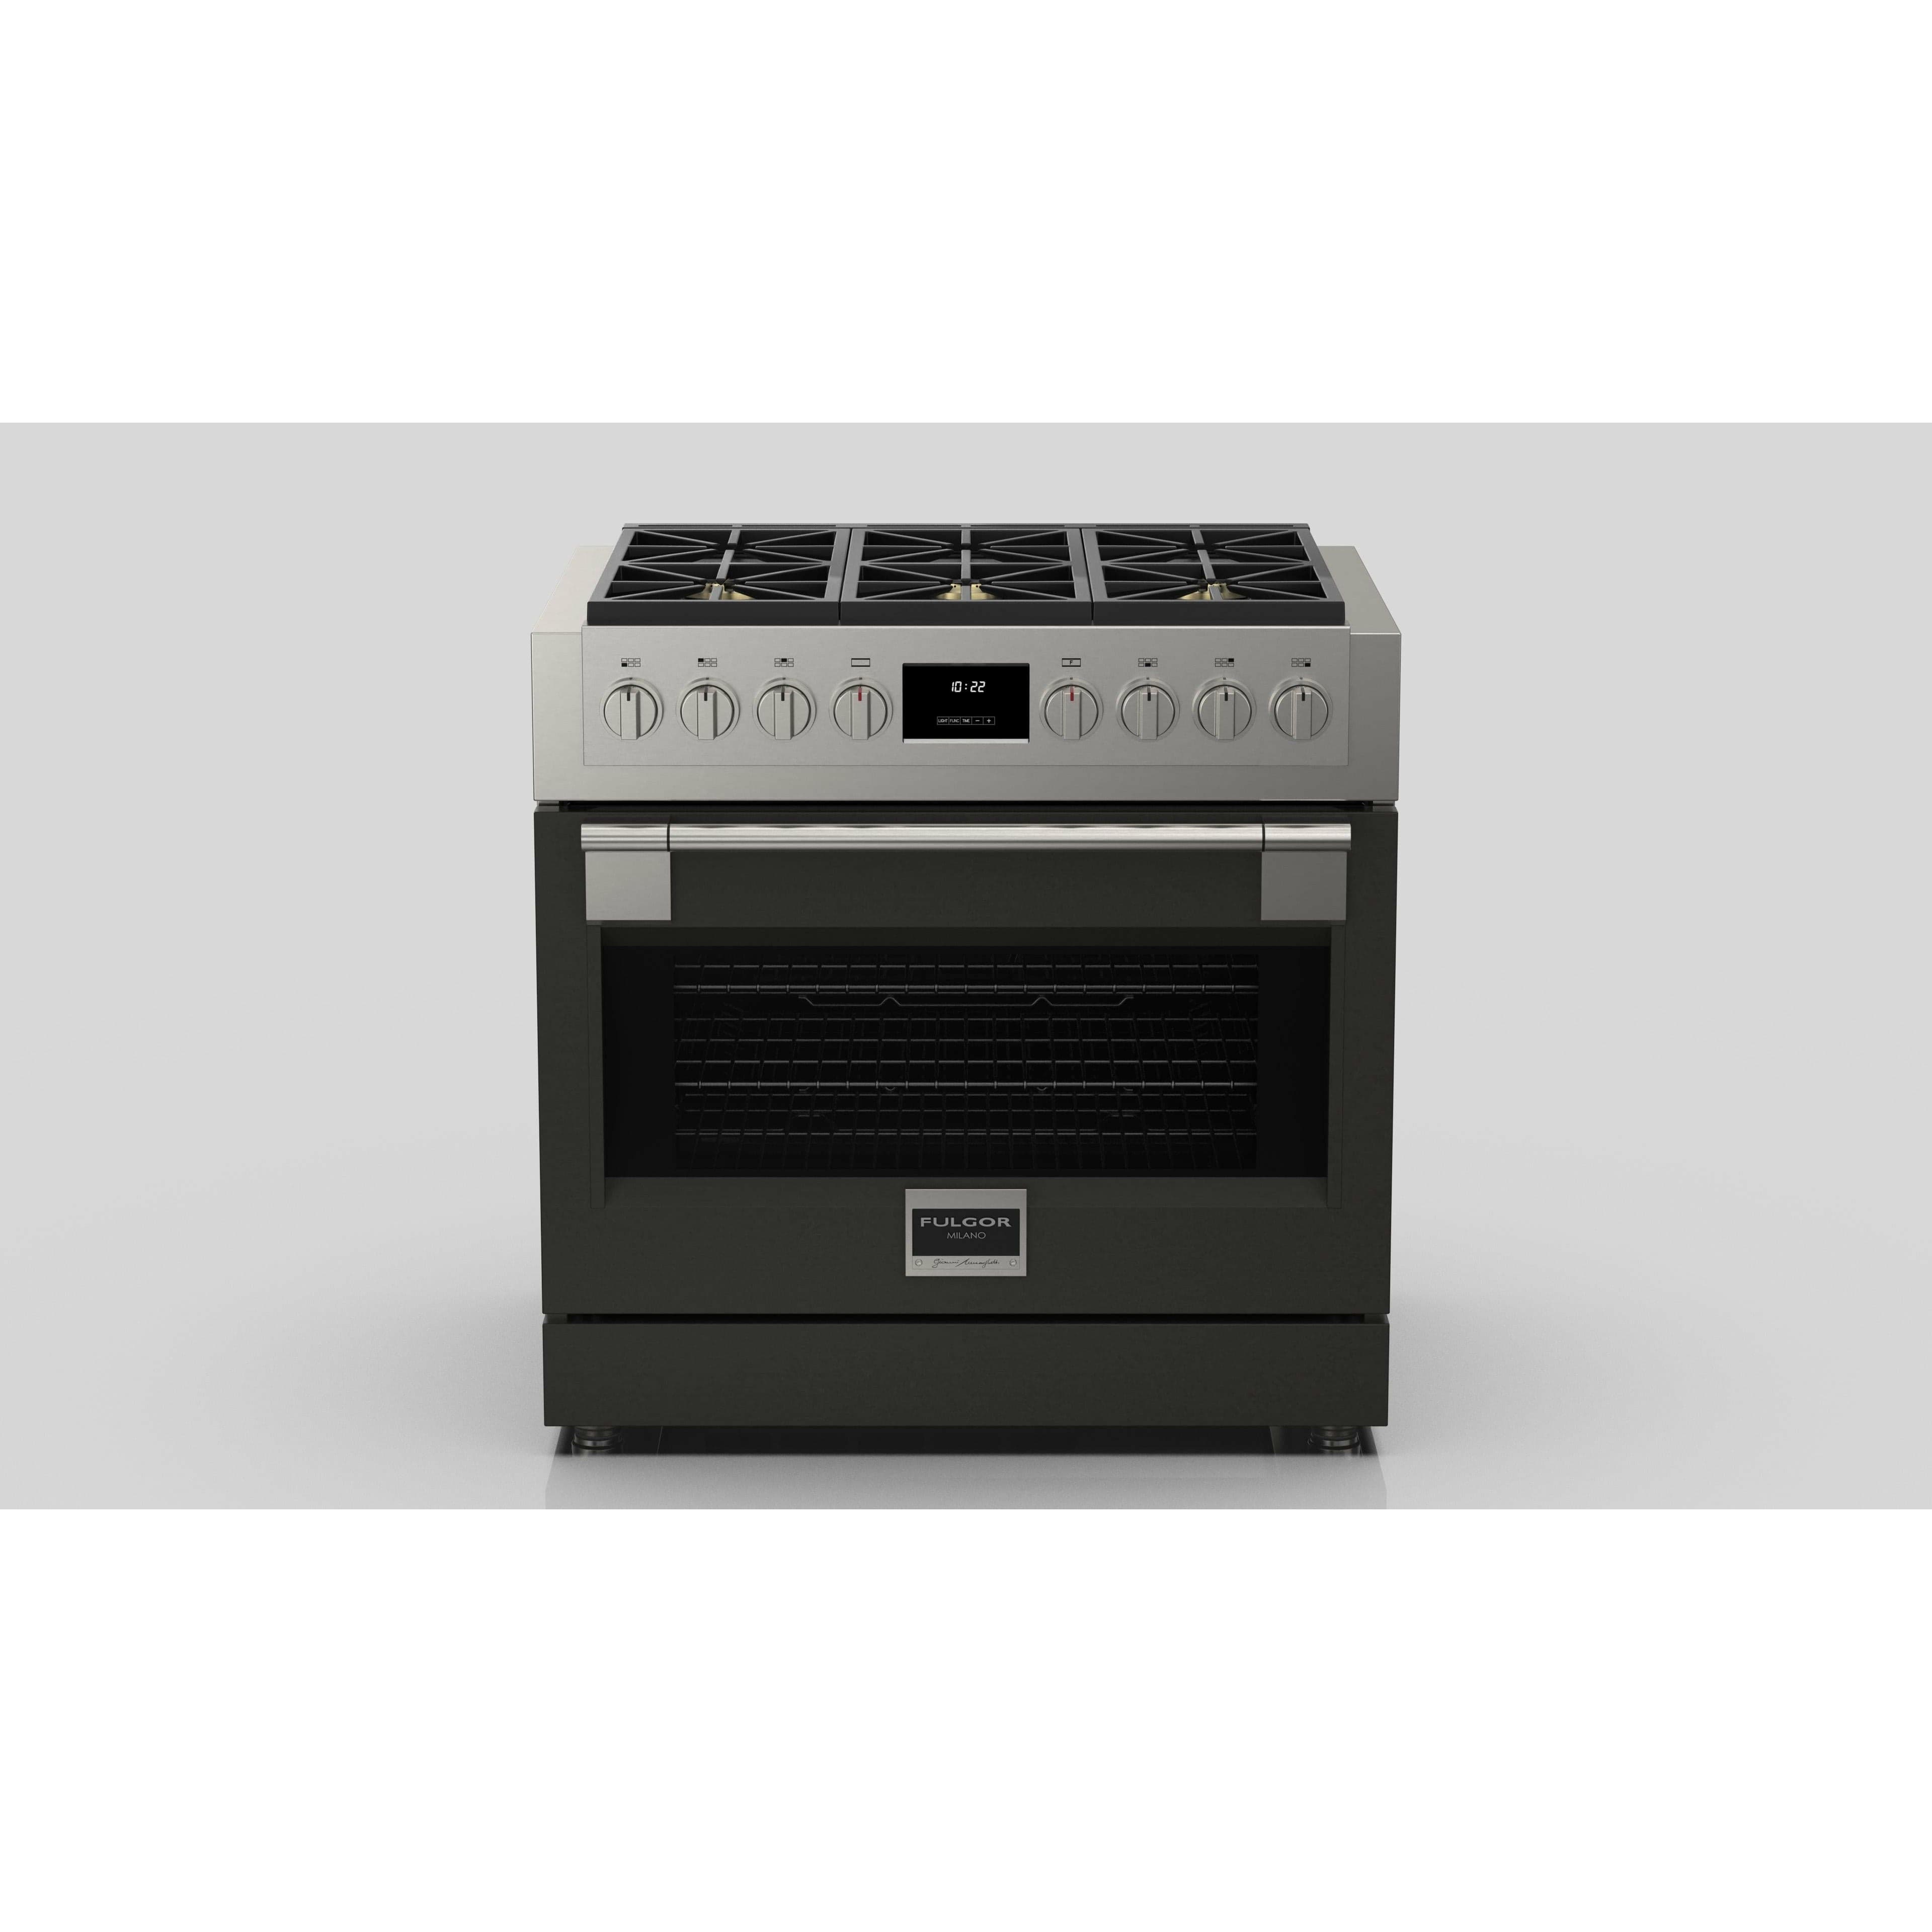 Fulgor Milano 36" Professional Gas Range with 6 Dual-Flame Burners, 5.7 cu. ft. Capacity, Stainless Steel - F6PGR366S2 Ranges PDRKIT36MG Luxury Appliances Direct